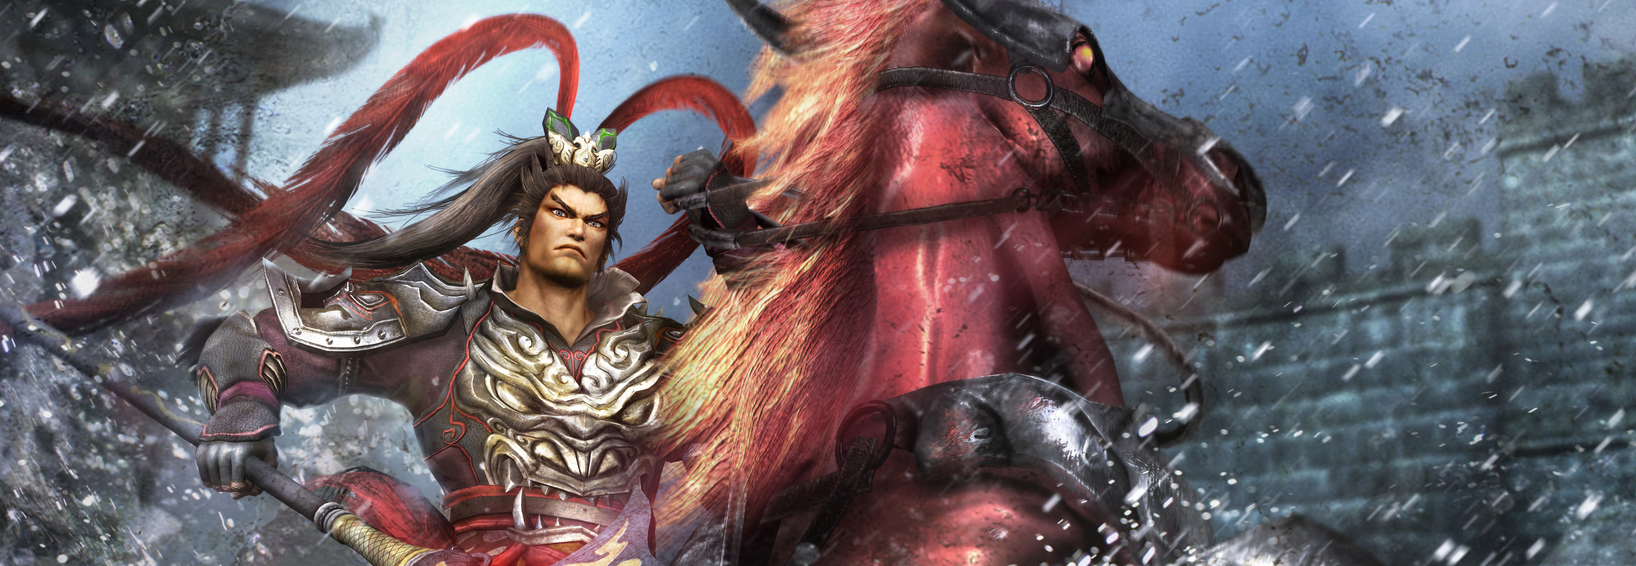 dynasty warriors 8 empires trainer